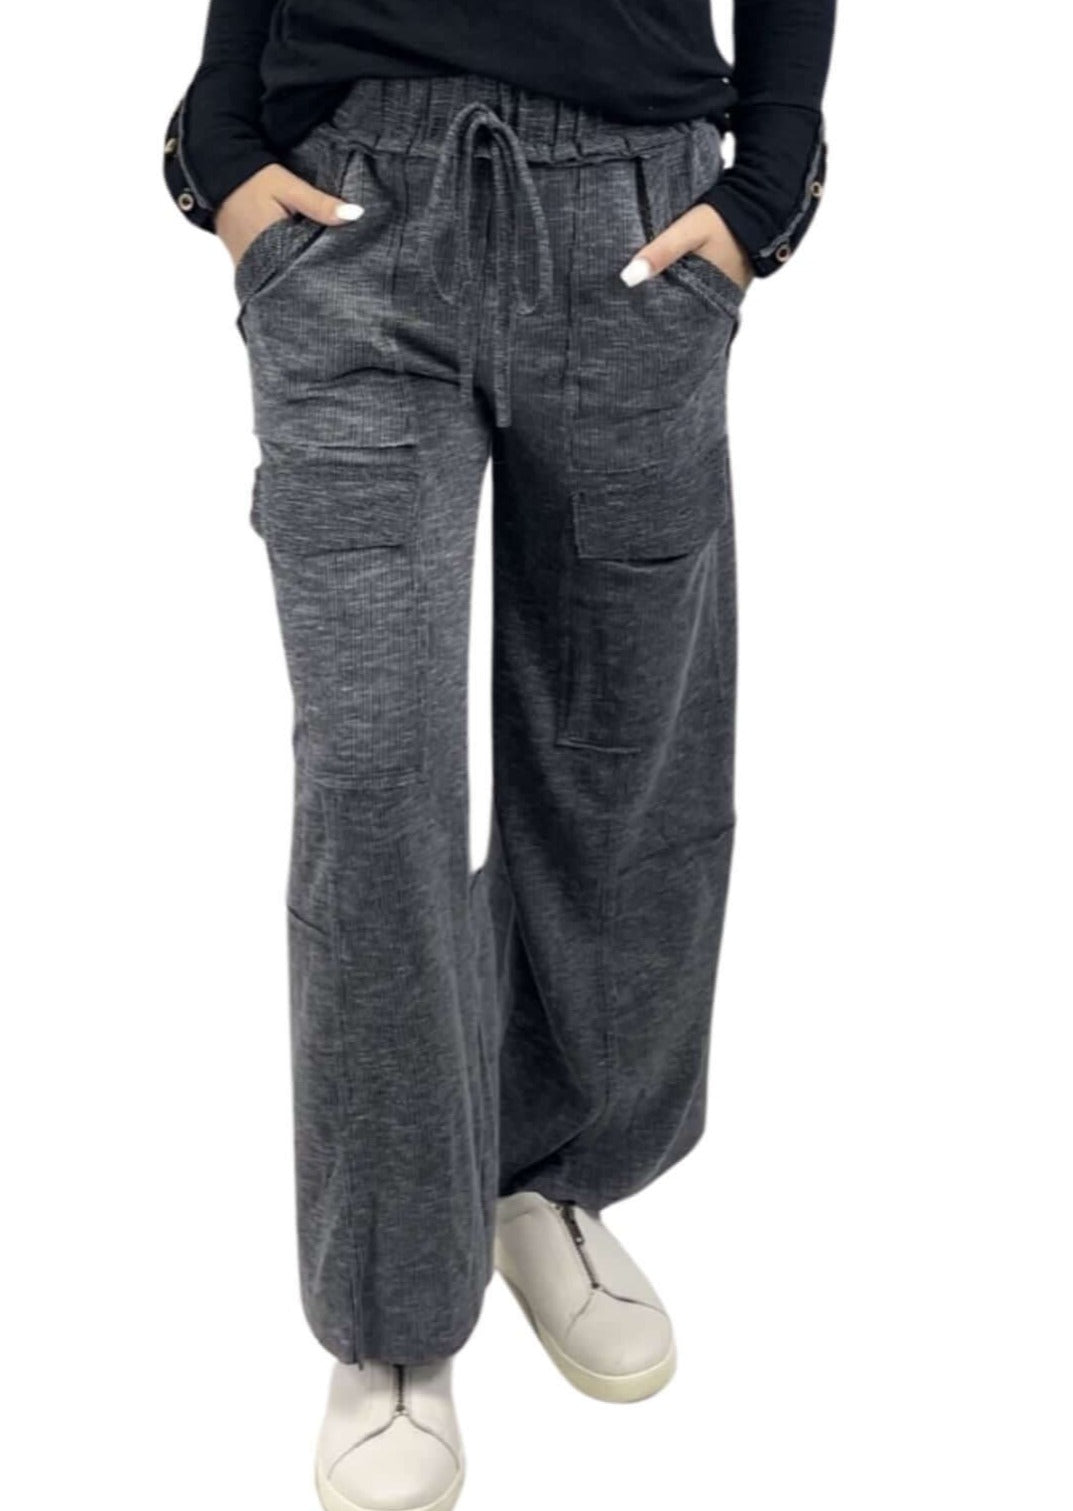 USA Made Ladies Vintage Look Wide Leg Cropped Ribbed Casual Pants With 6 Pockets in Charcoal Grey | Classy Cozy Cool Women's Made in America Clothing Boutique